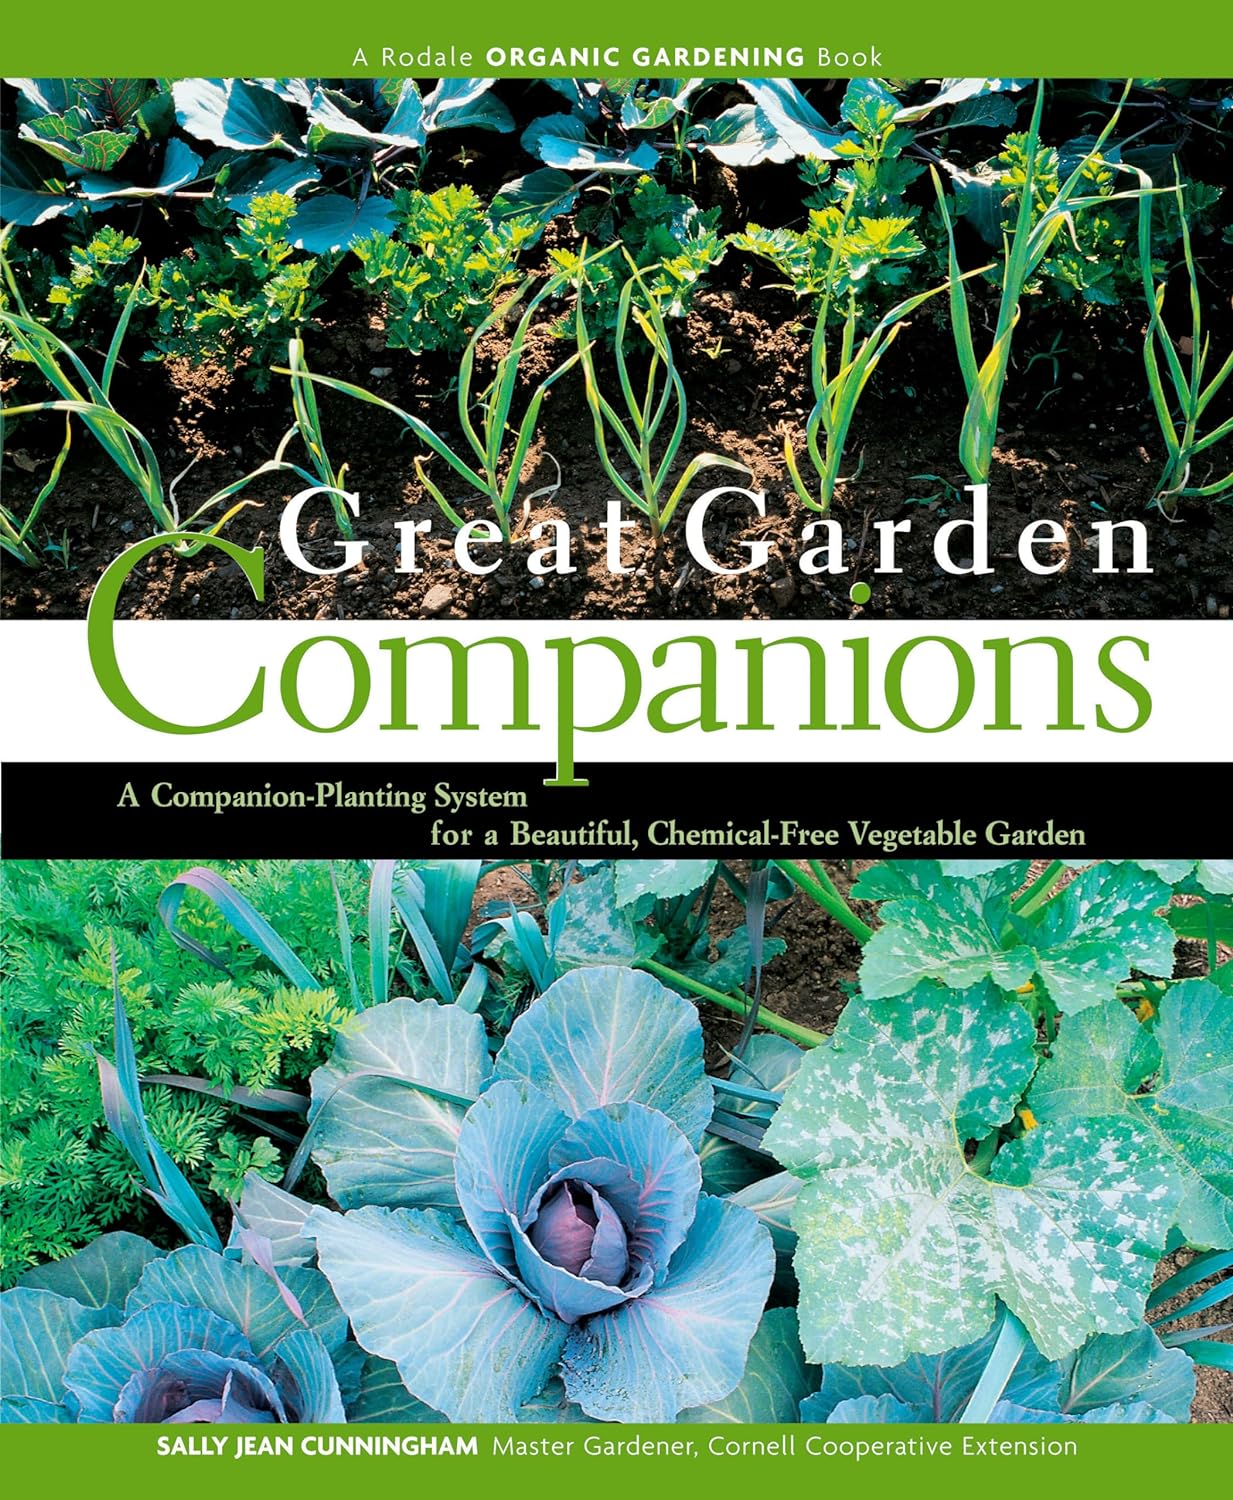 Great GardeGreat Garden Companions: A Companion-Planting System for a Beautiful, Chemical-Free Vegetable Garden - by Sally Jean Cunningham Companions